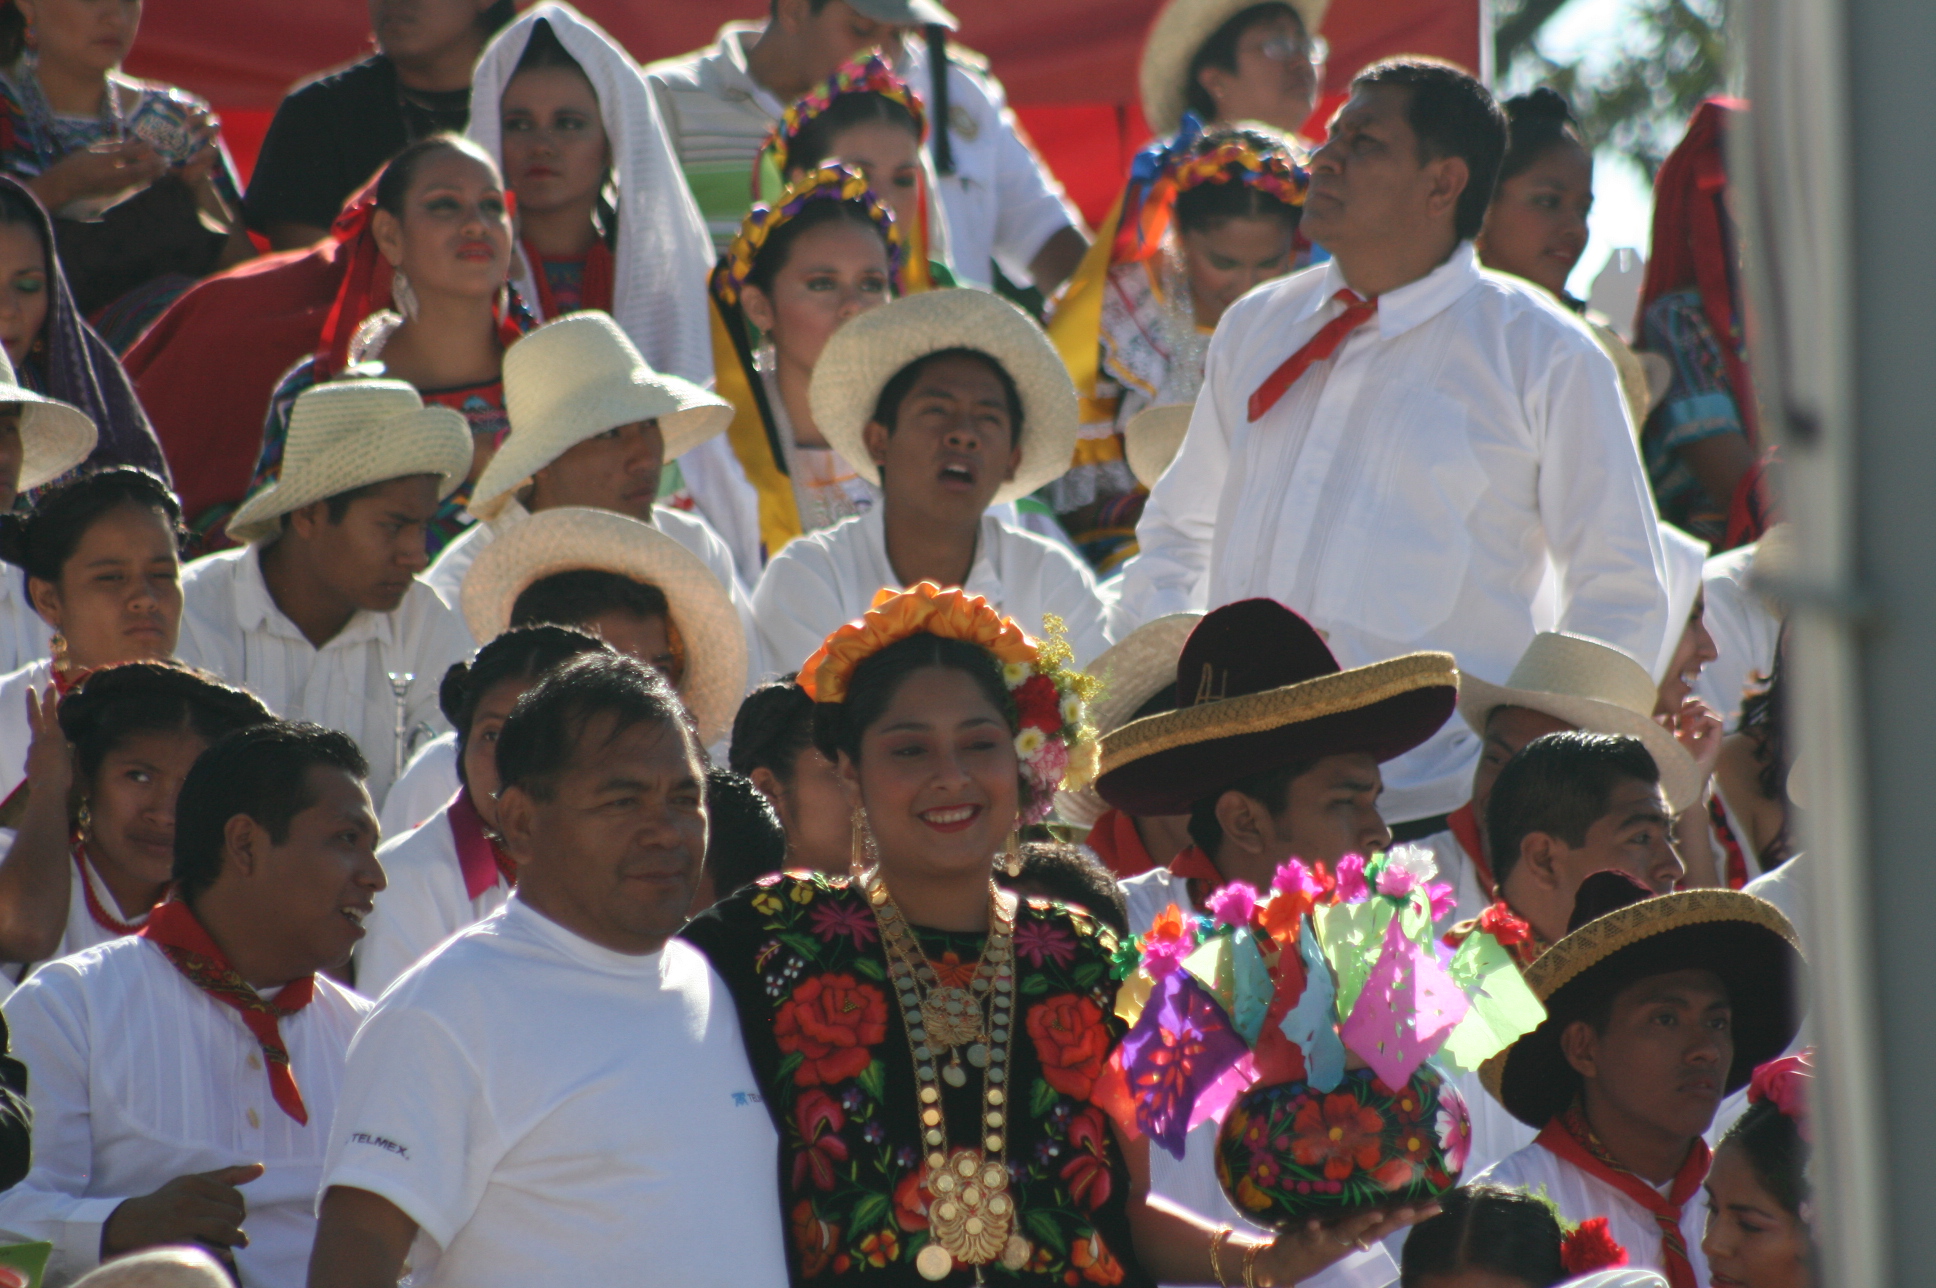 a crowd of people with white shirts, white hats, and bright colored clothing